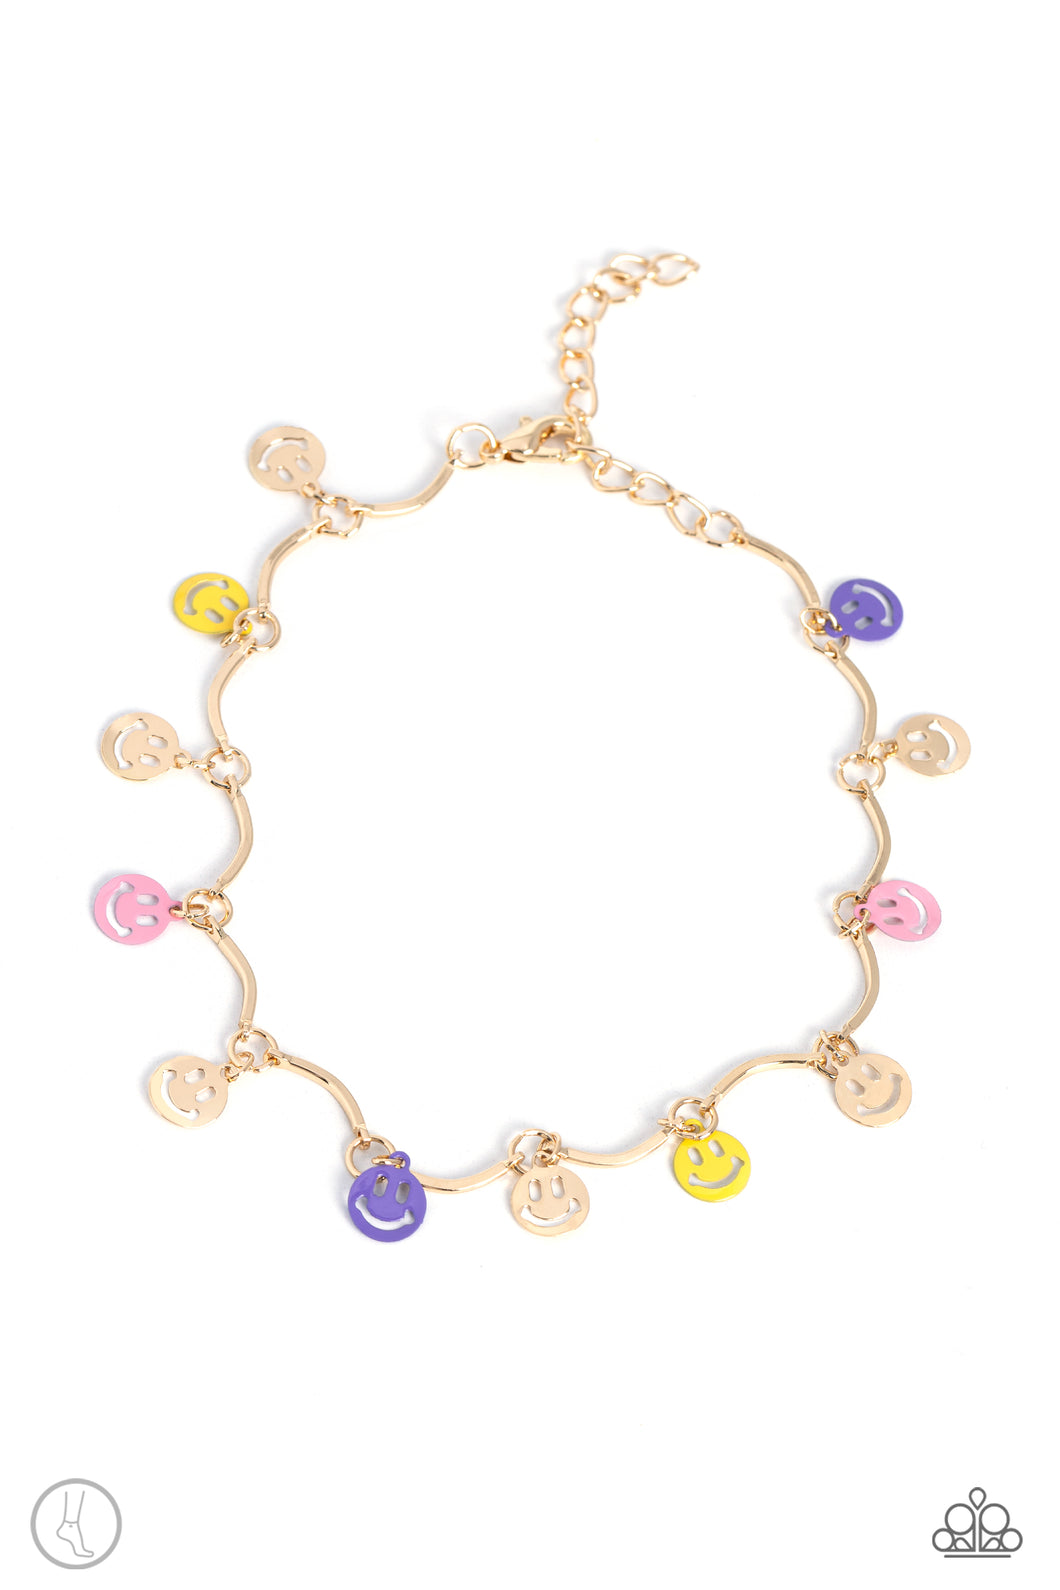 oak-sisters-jewelry-smiley-sensation-gold-anklet-paparazzi-accessories-by-lisa